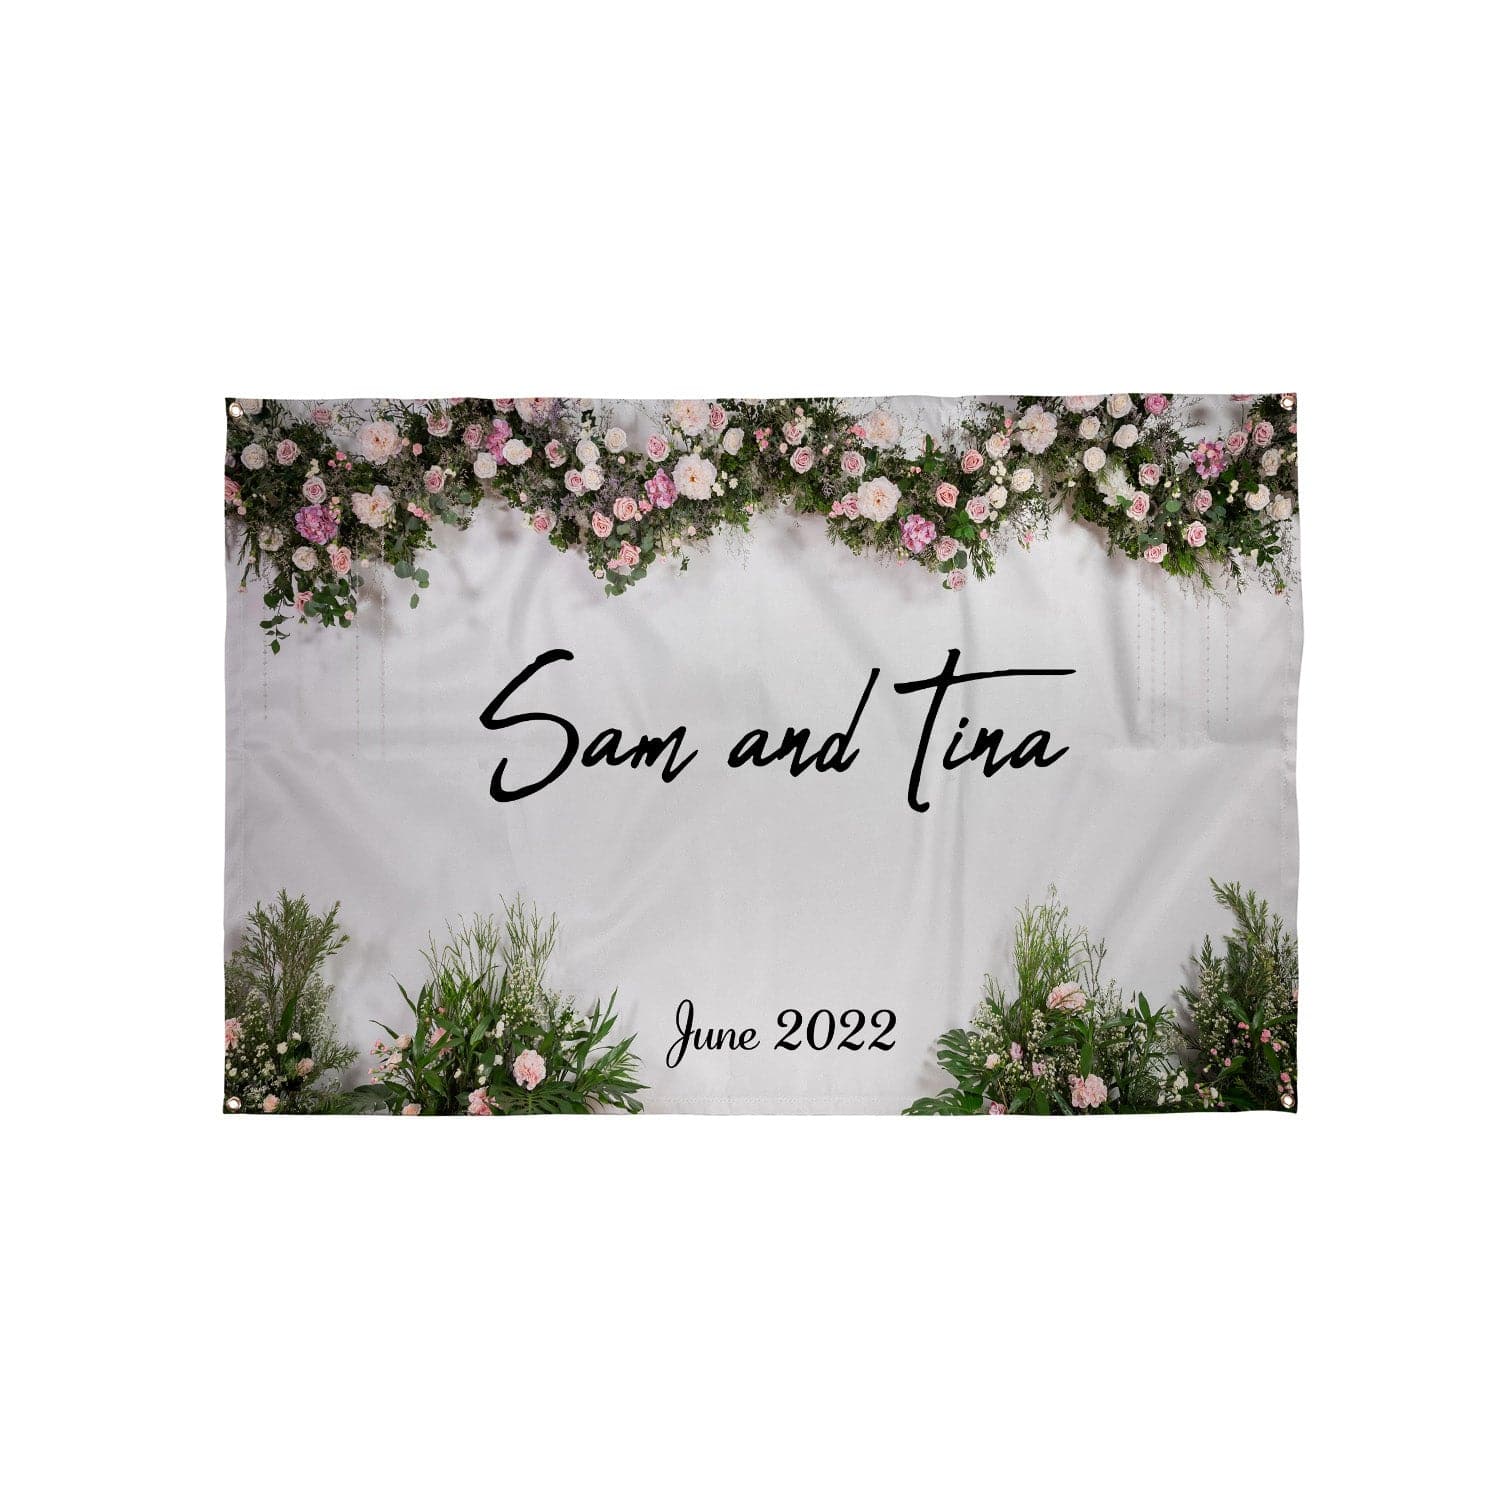 Personalised Text - Wedding Garland Party Backdrop - 5ft x 3ft